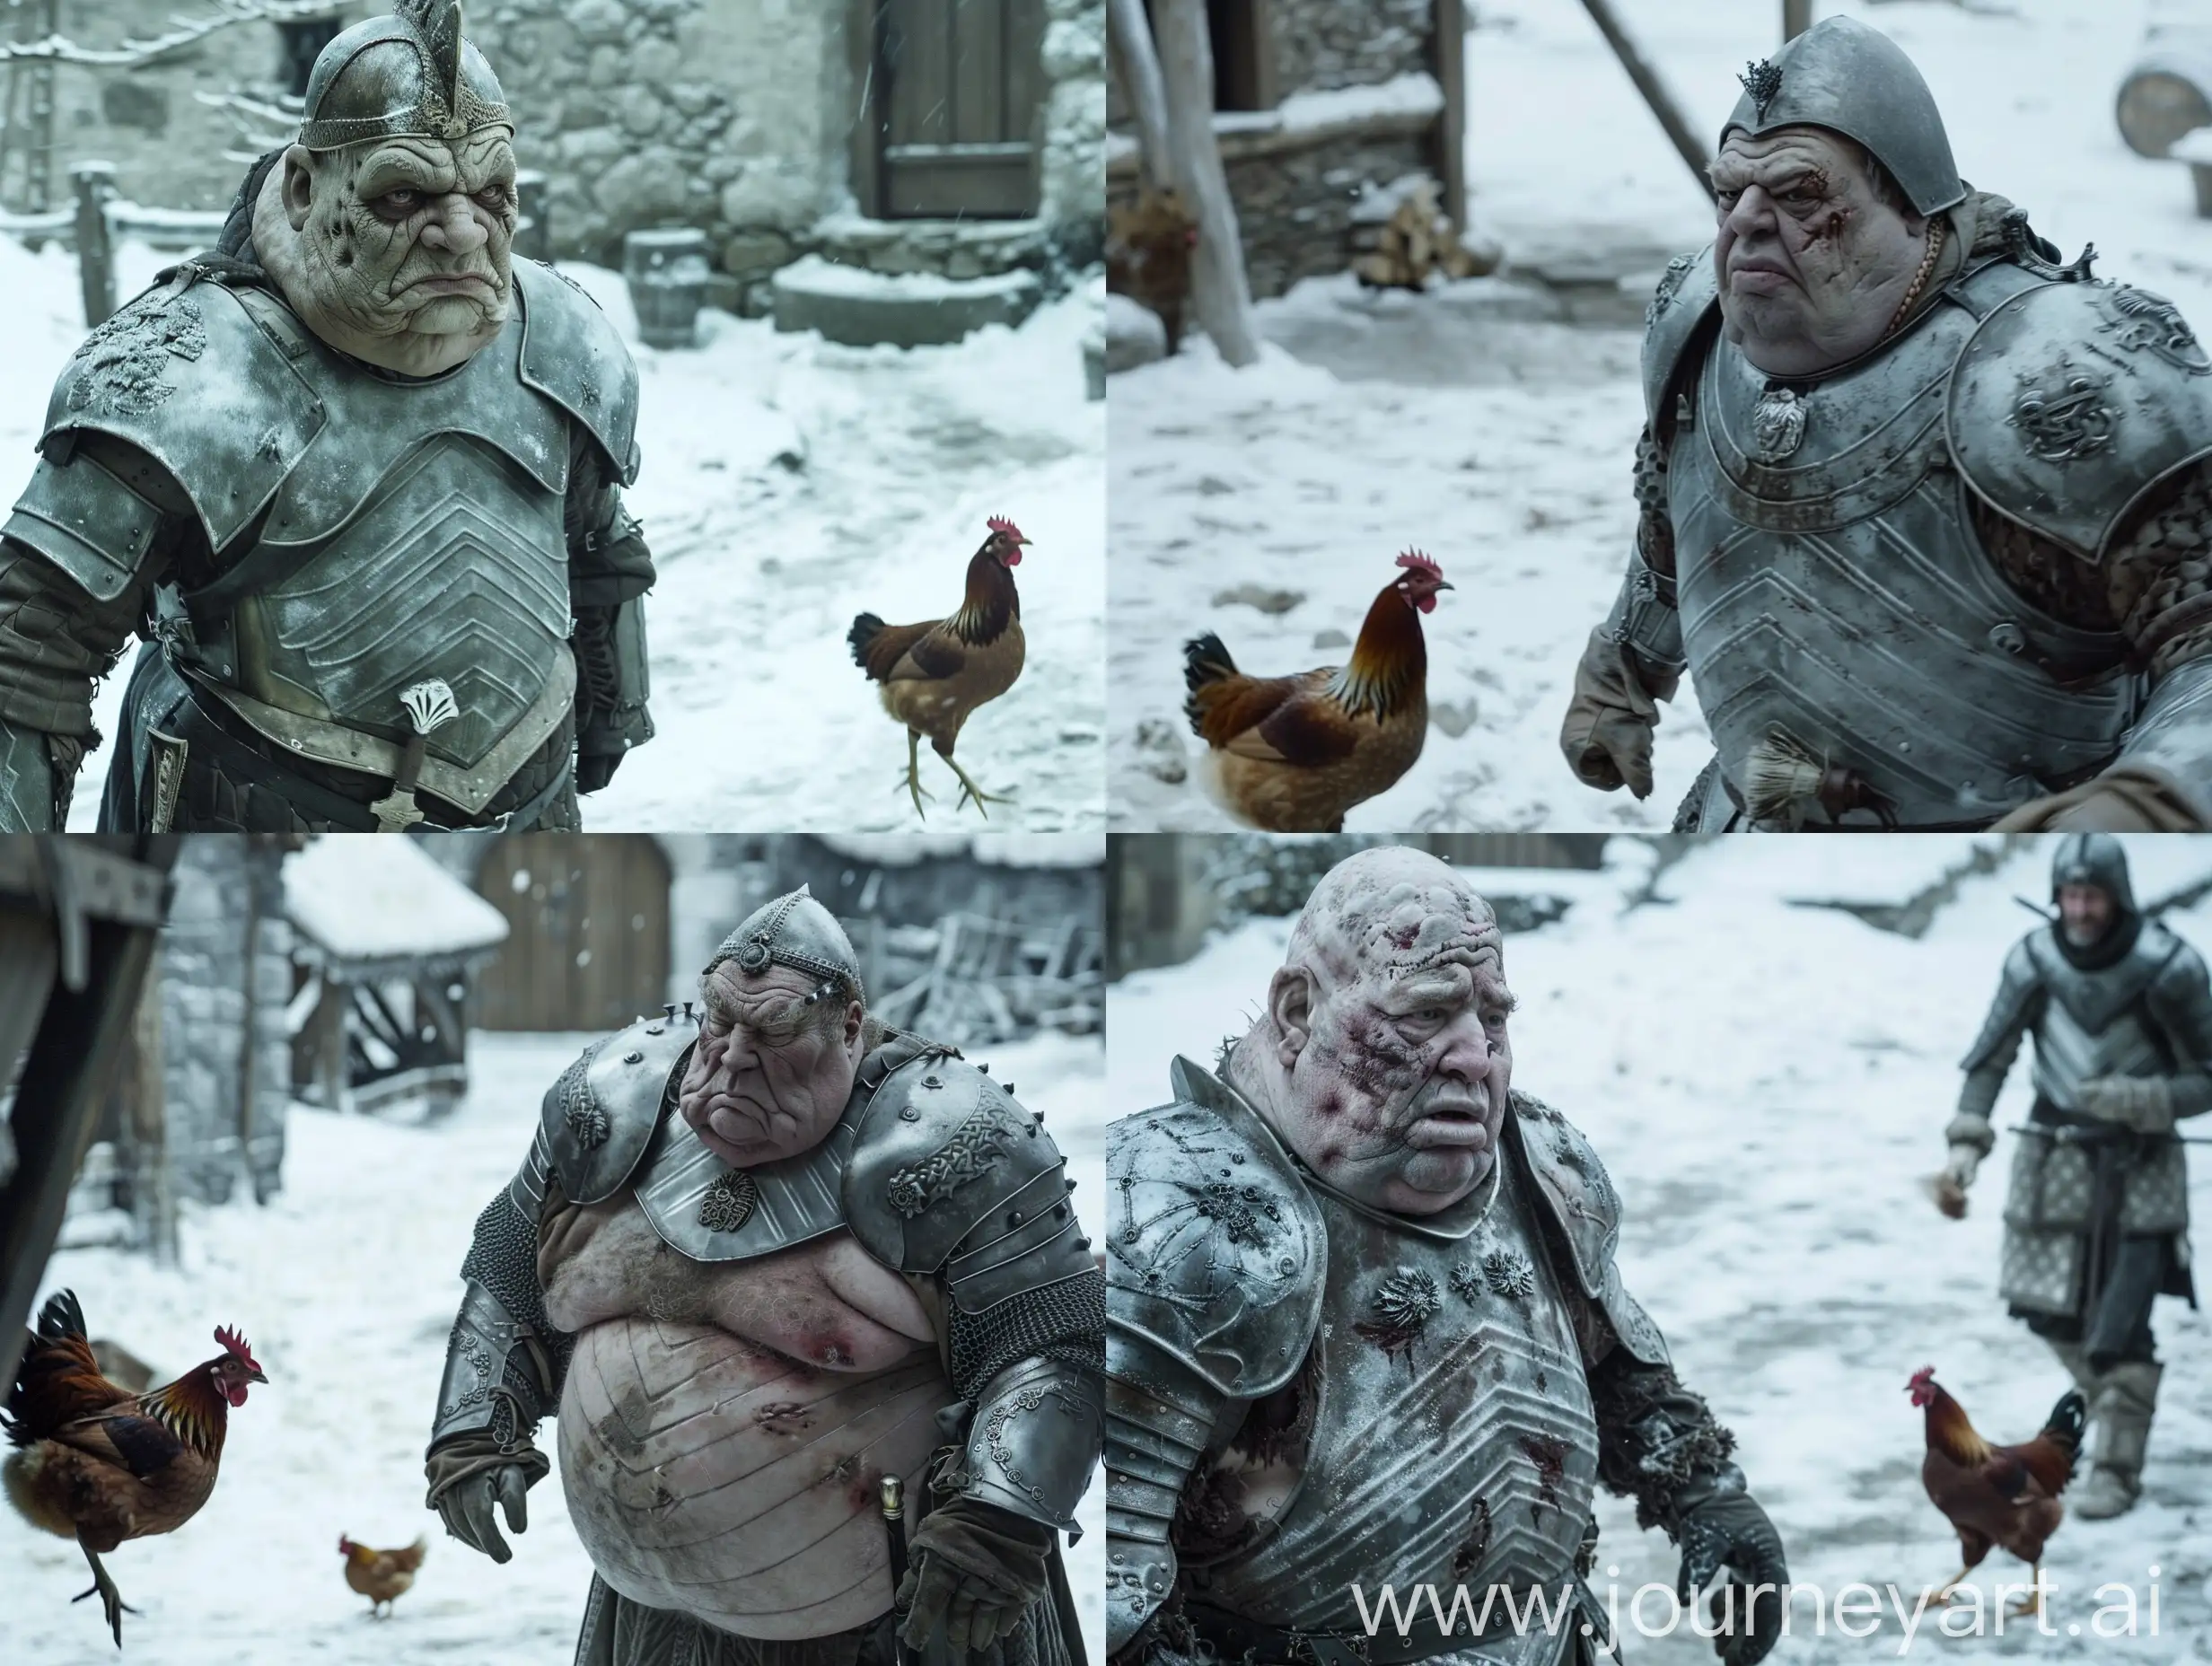 Ramsey Bolton in the Game of Thrones series, Ramsey Bolton is very fat, Ramsey Bolton's face and body are very fat, Ramsey Bolton is wearing the armor and helmet of his Winterfell soldier, Ramsey Bolton is in the snow-covered yard of Winterfell, Ramsey Bolton is looking for a chicken. does, the chicken is running away from Ramsey Bolton, the camera follows the fat Ramsey Bolton from the side, the camera captures him walking, the style of witcher, the lighting is classic style, realistic, clear, q2